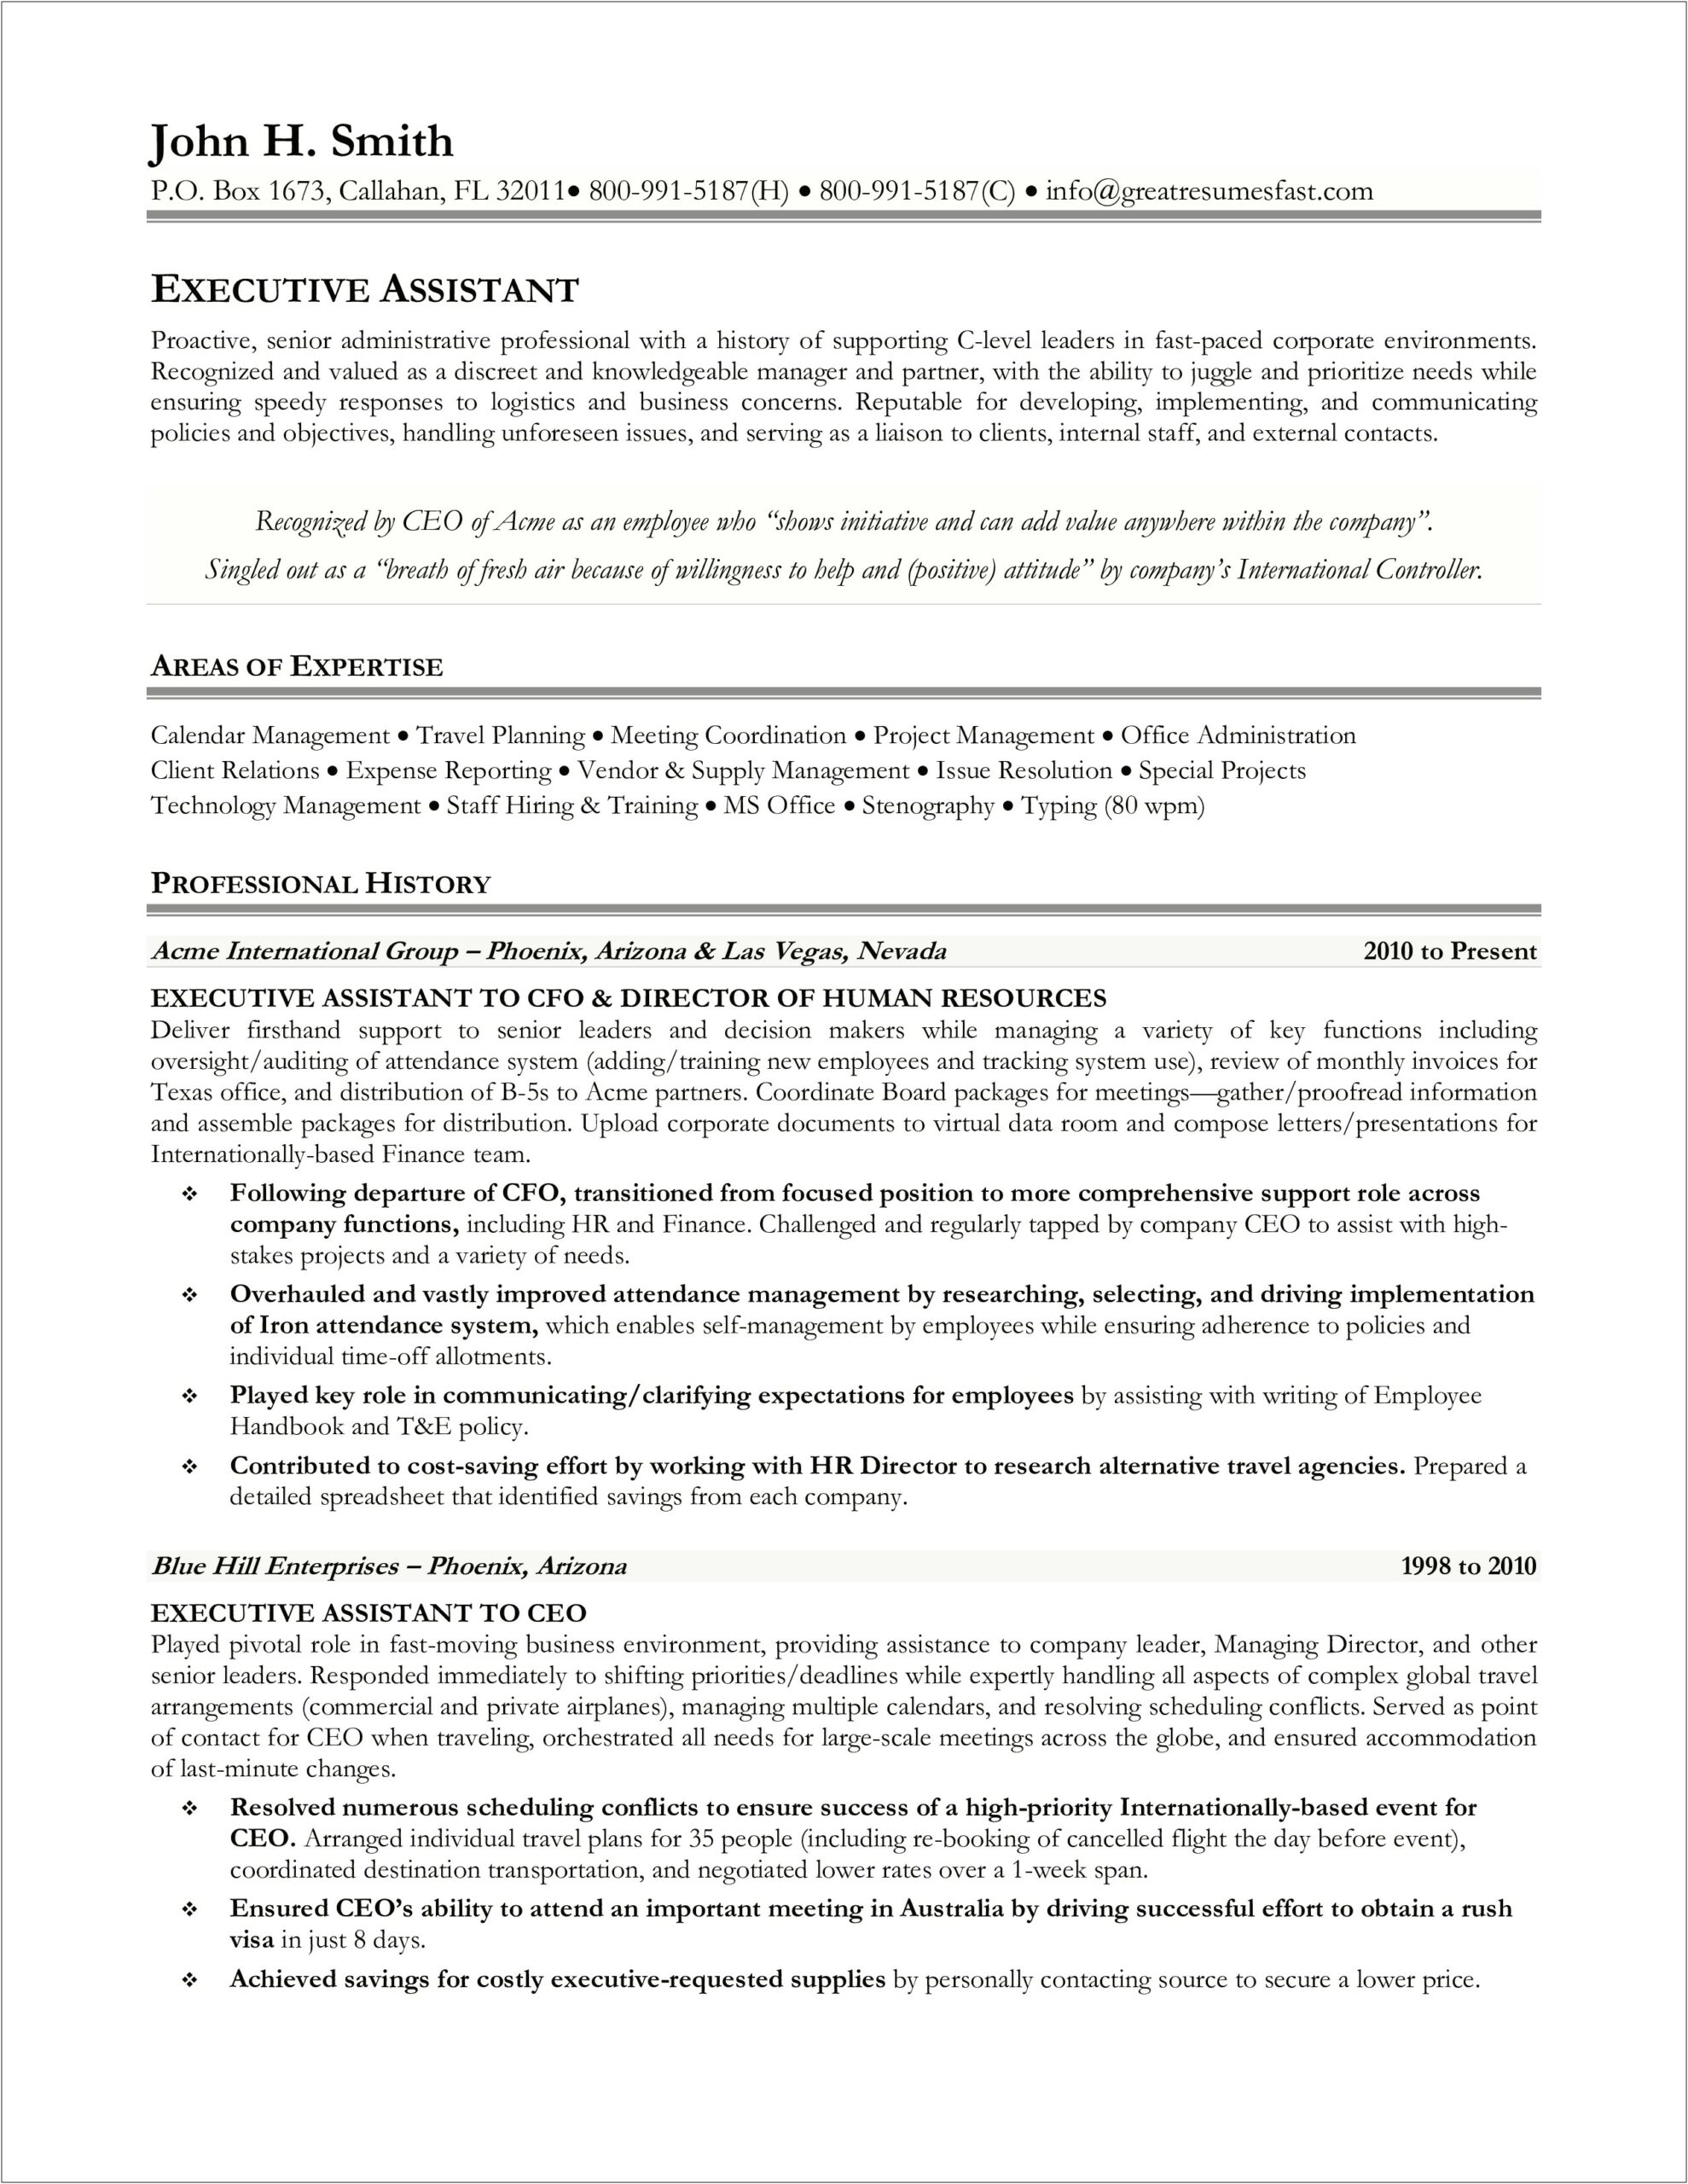 Skills For Resume Executive Assistant Property Management